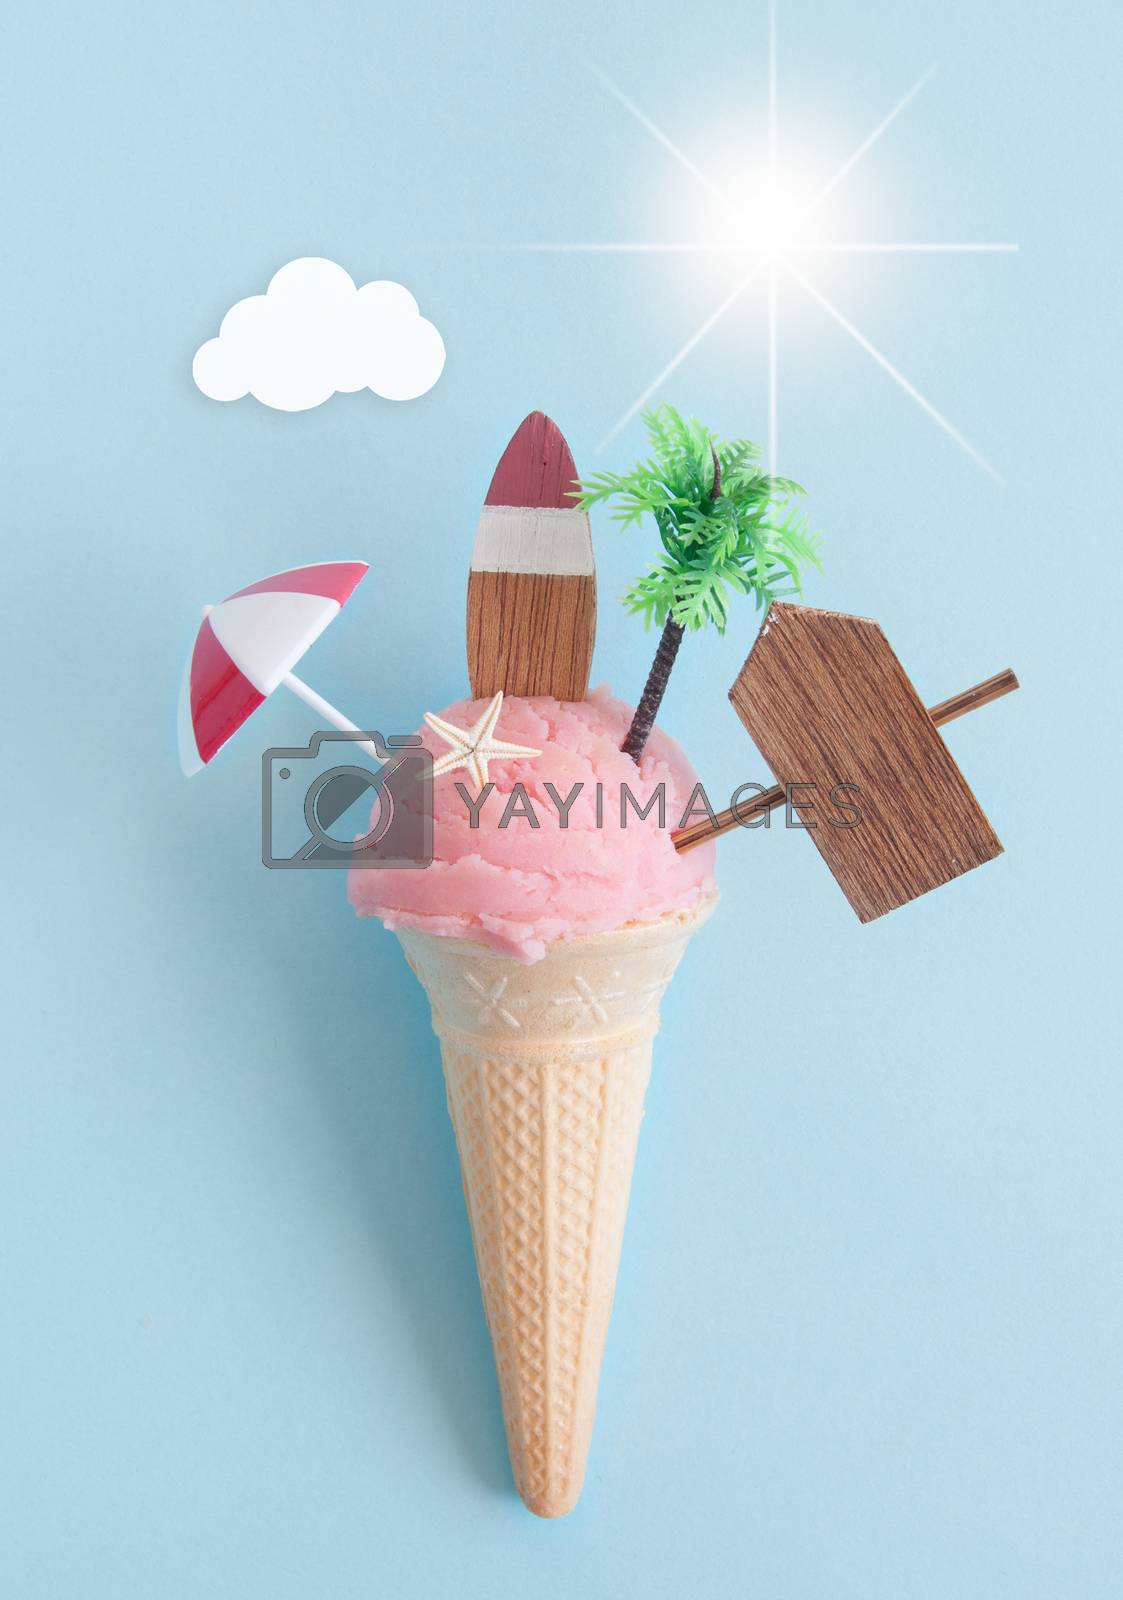 Royalty free image of Frozen icecream cone by unikpix